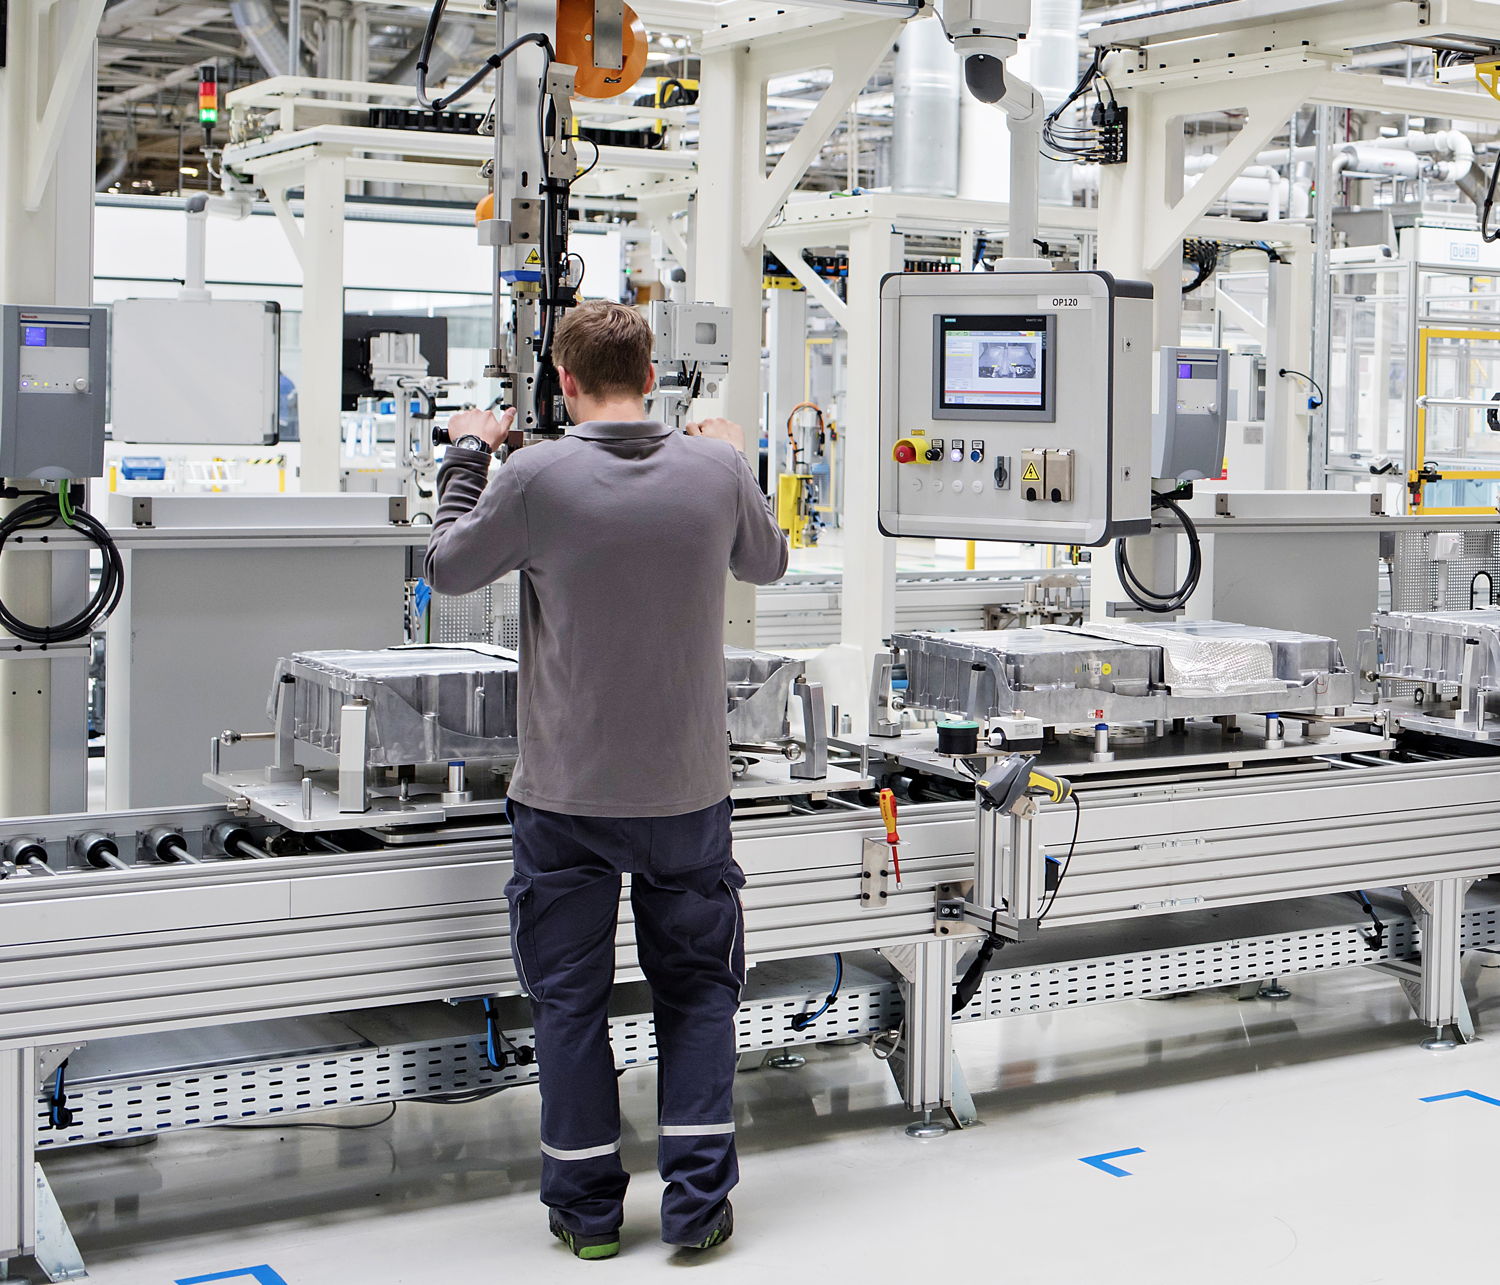 ŠKODA has invested 25.3 million euros in the production
lines for high-voltage batteries. Two years ago, the brand
started preparing the Mladá Boleslav plant for the
manufacturing of electric components.